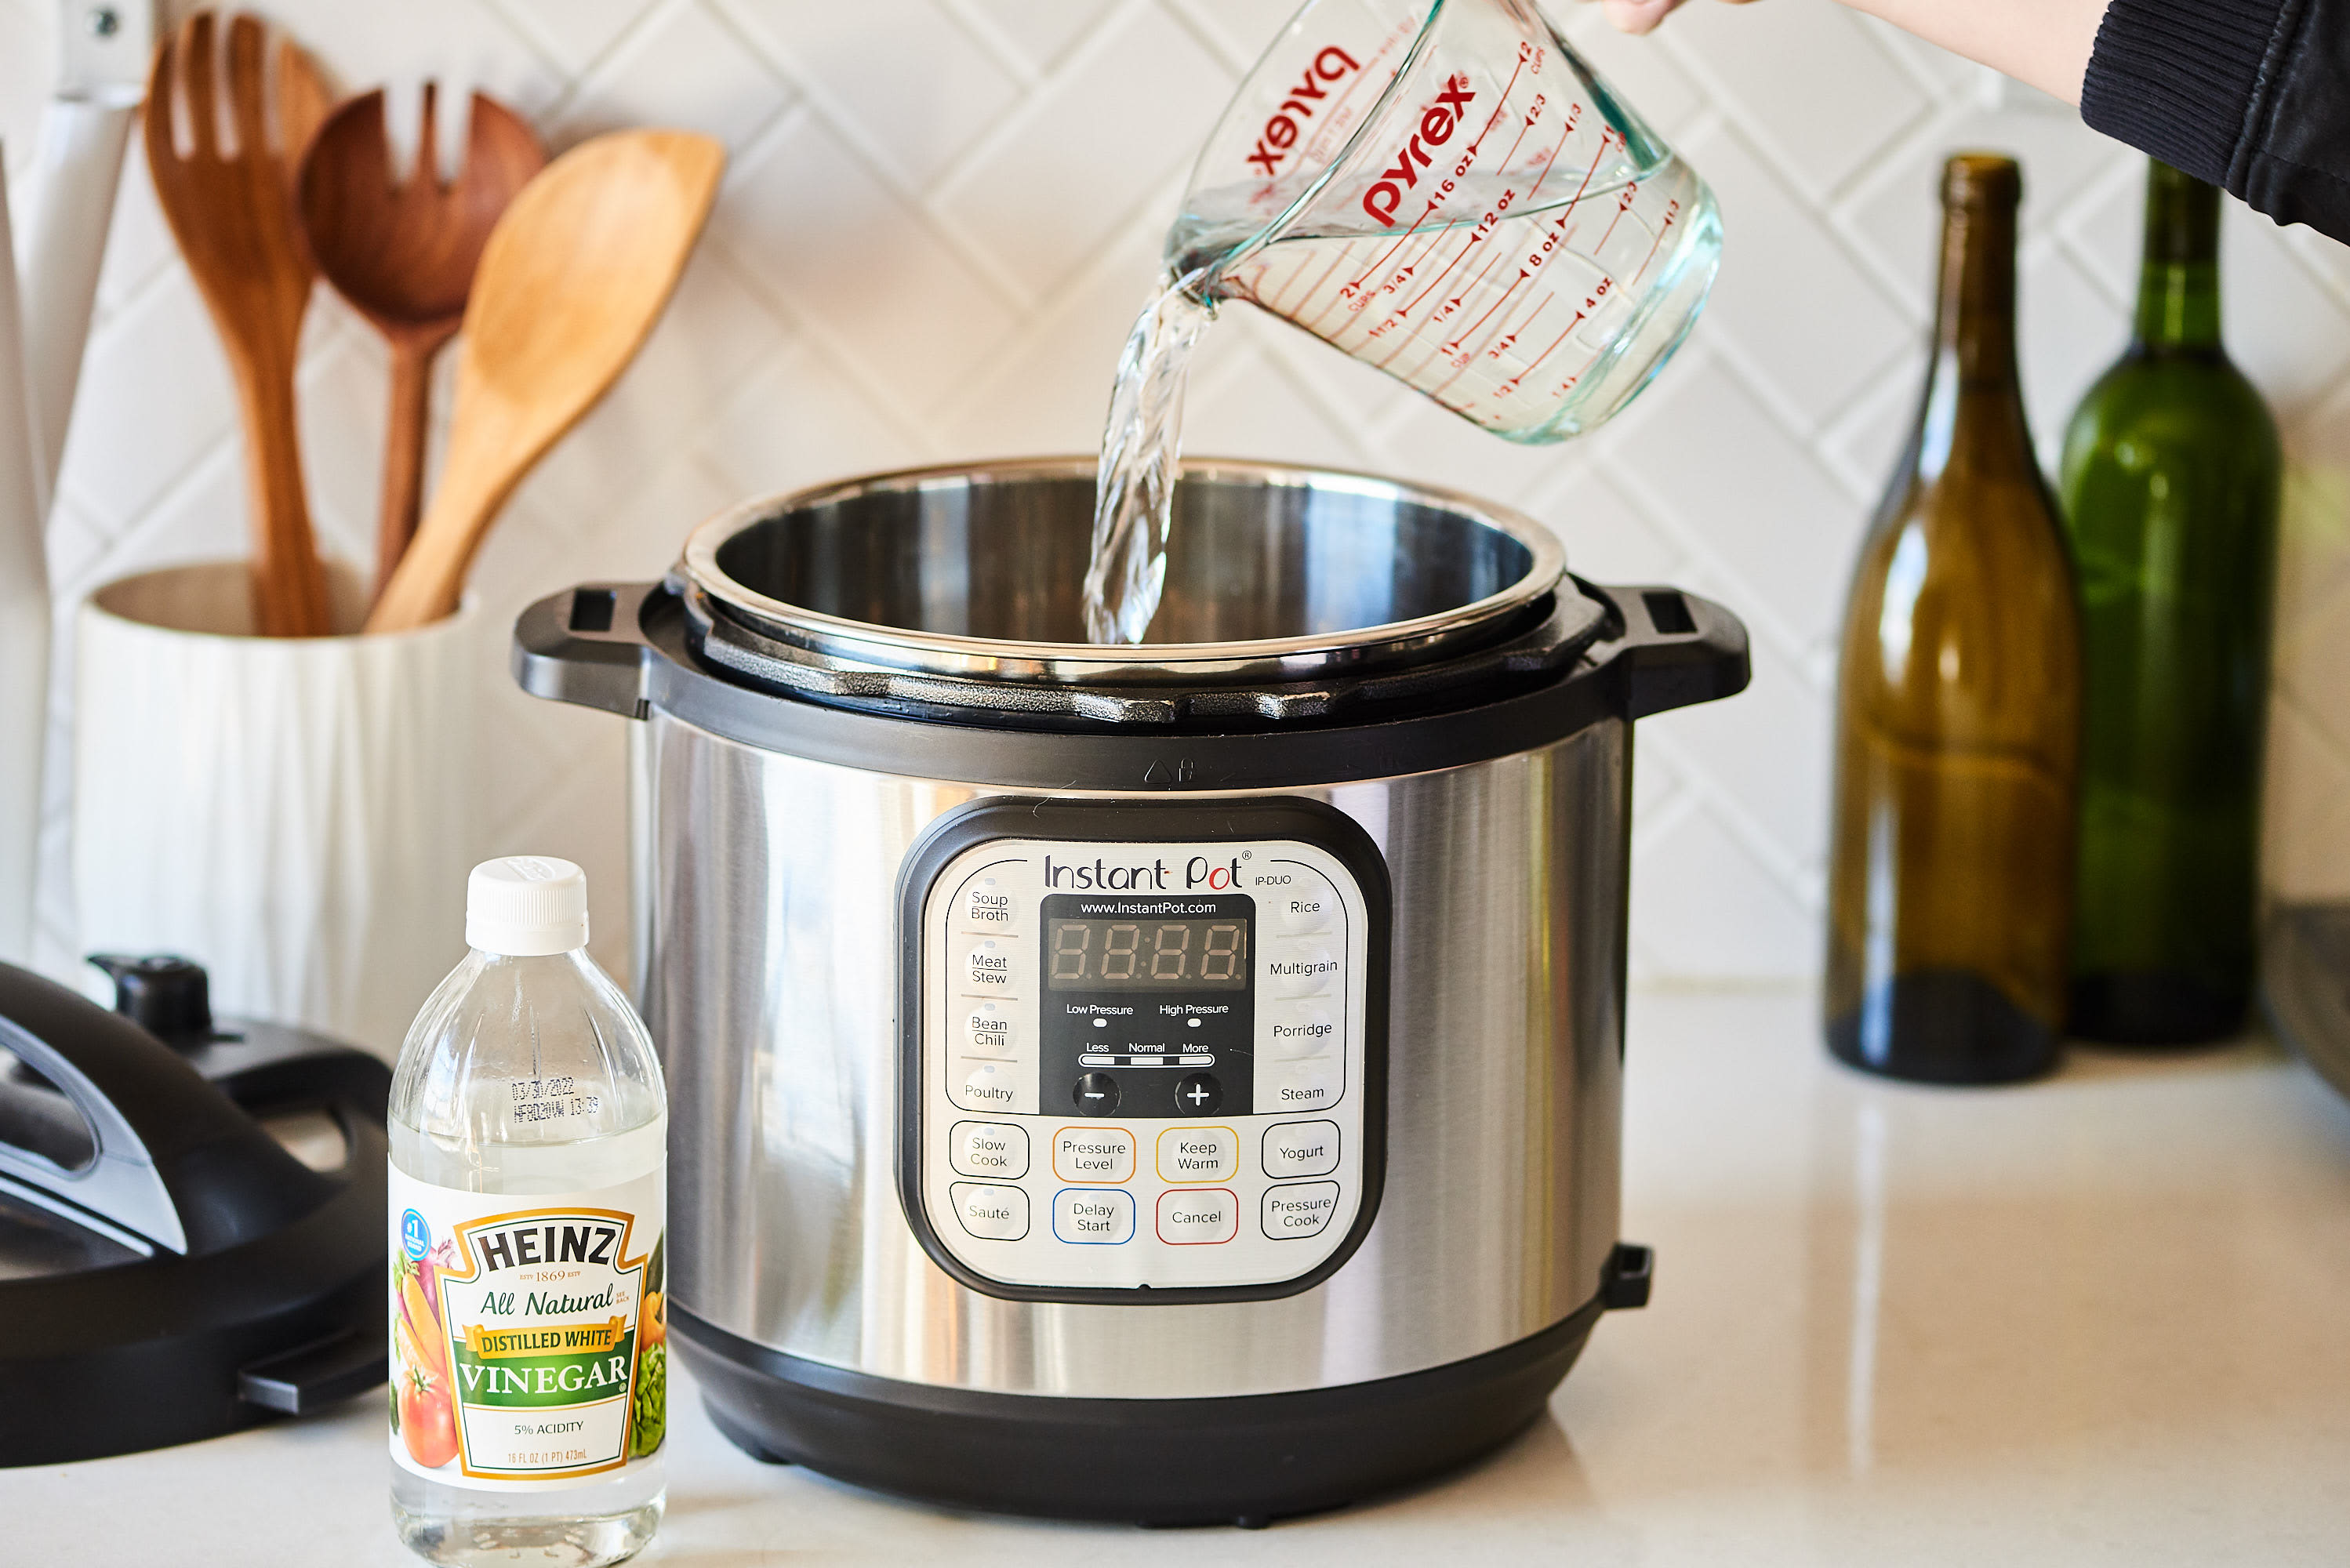 Instant Pot Sealing Ring - how to remove and replace 